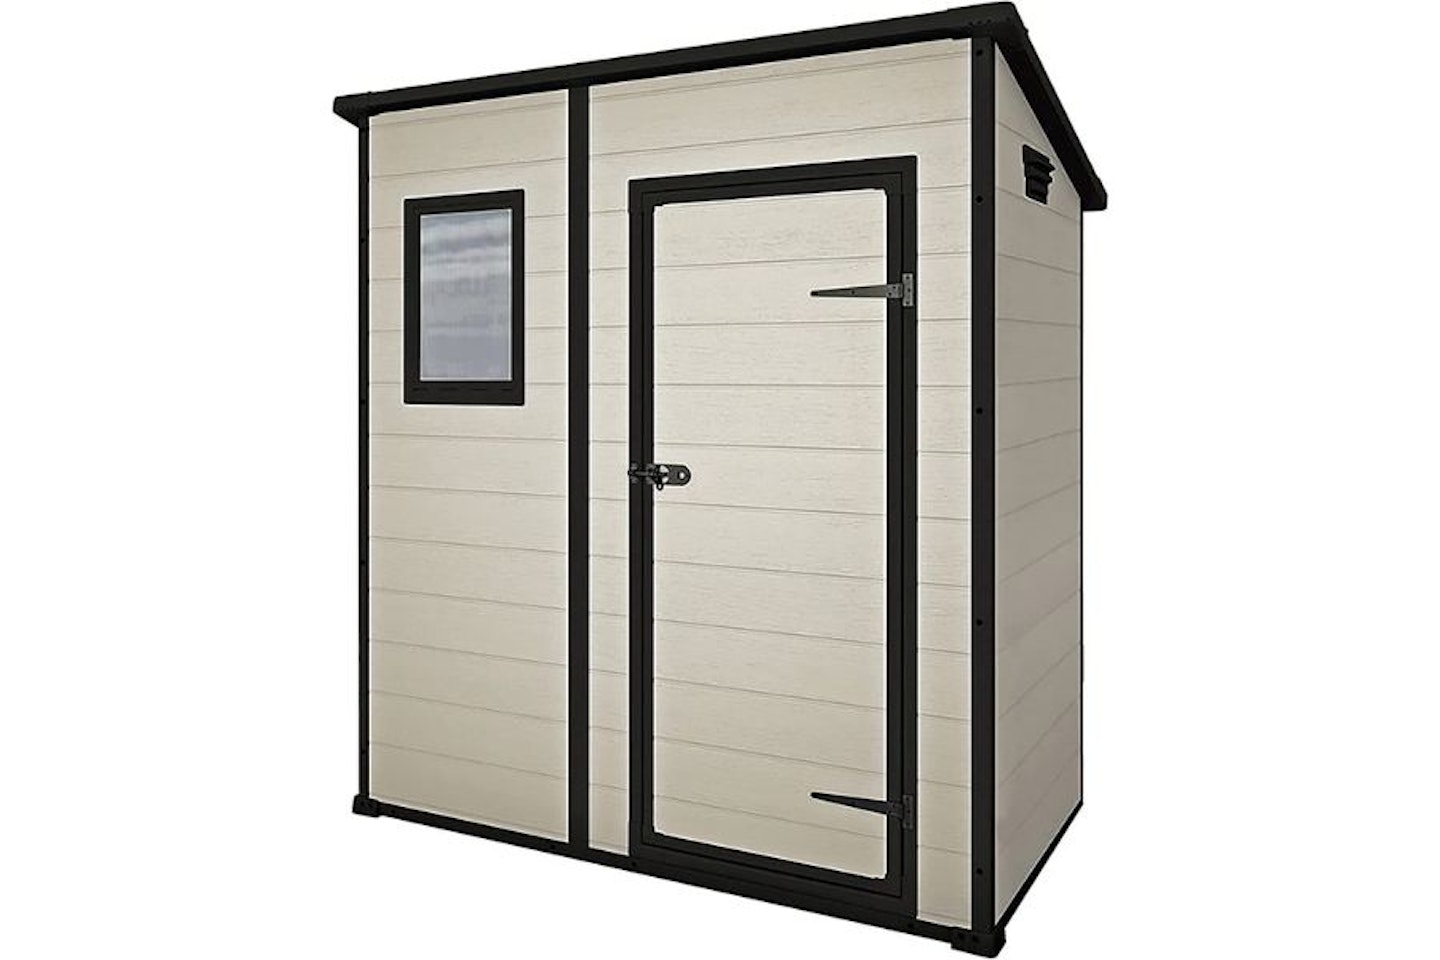 Keter Manor Pent Tool Shed